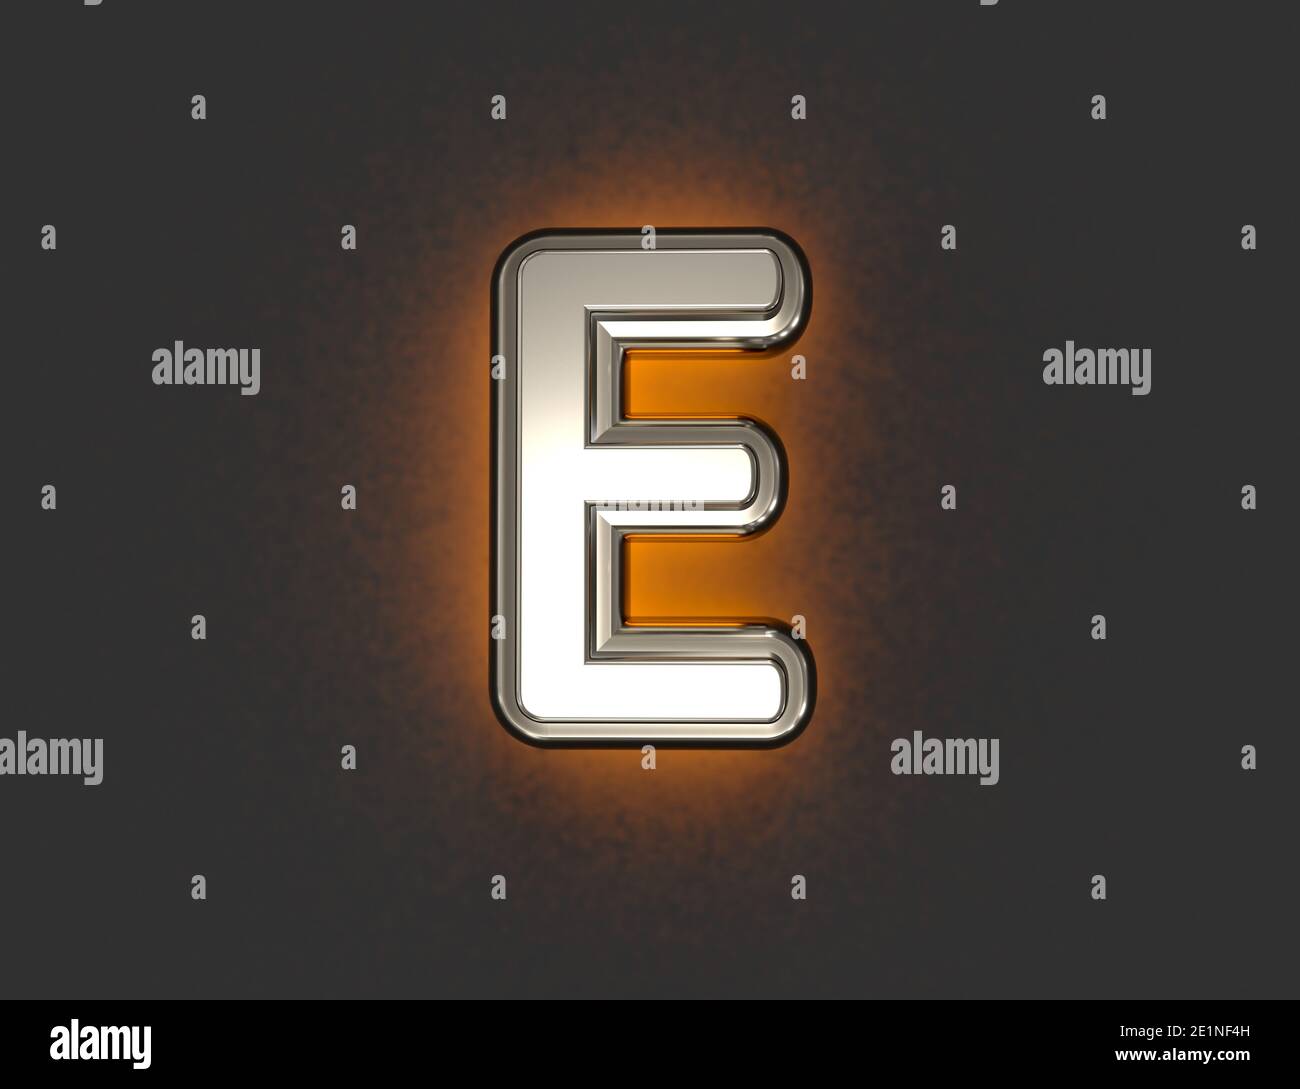 Metallic Silver Alphabet Letters Collection Stock Illustration 239108986